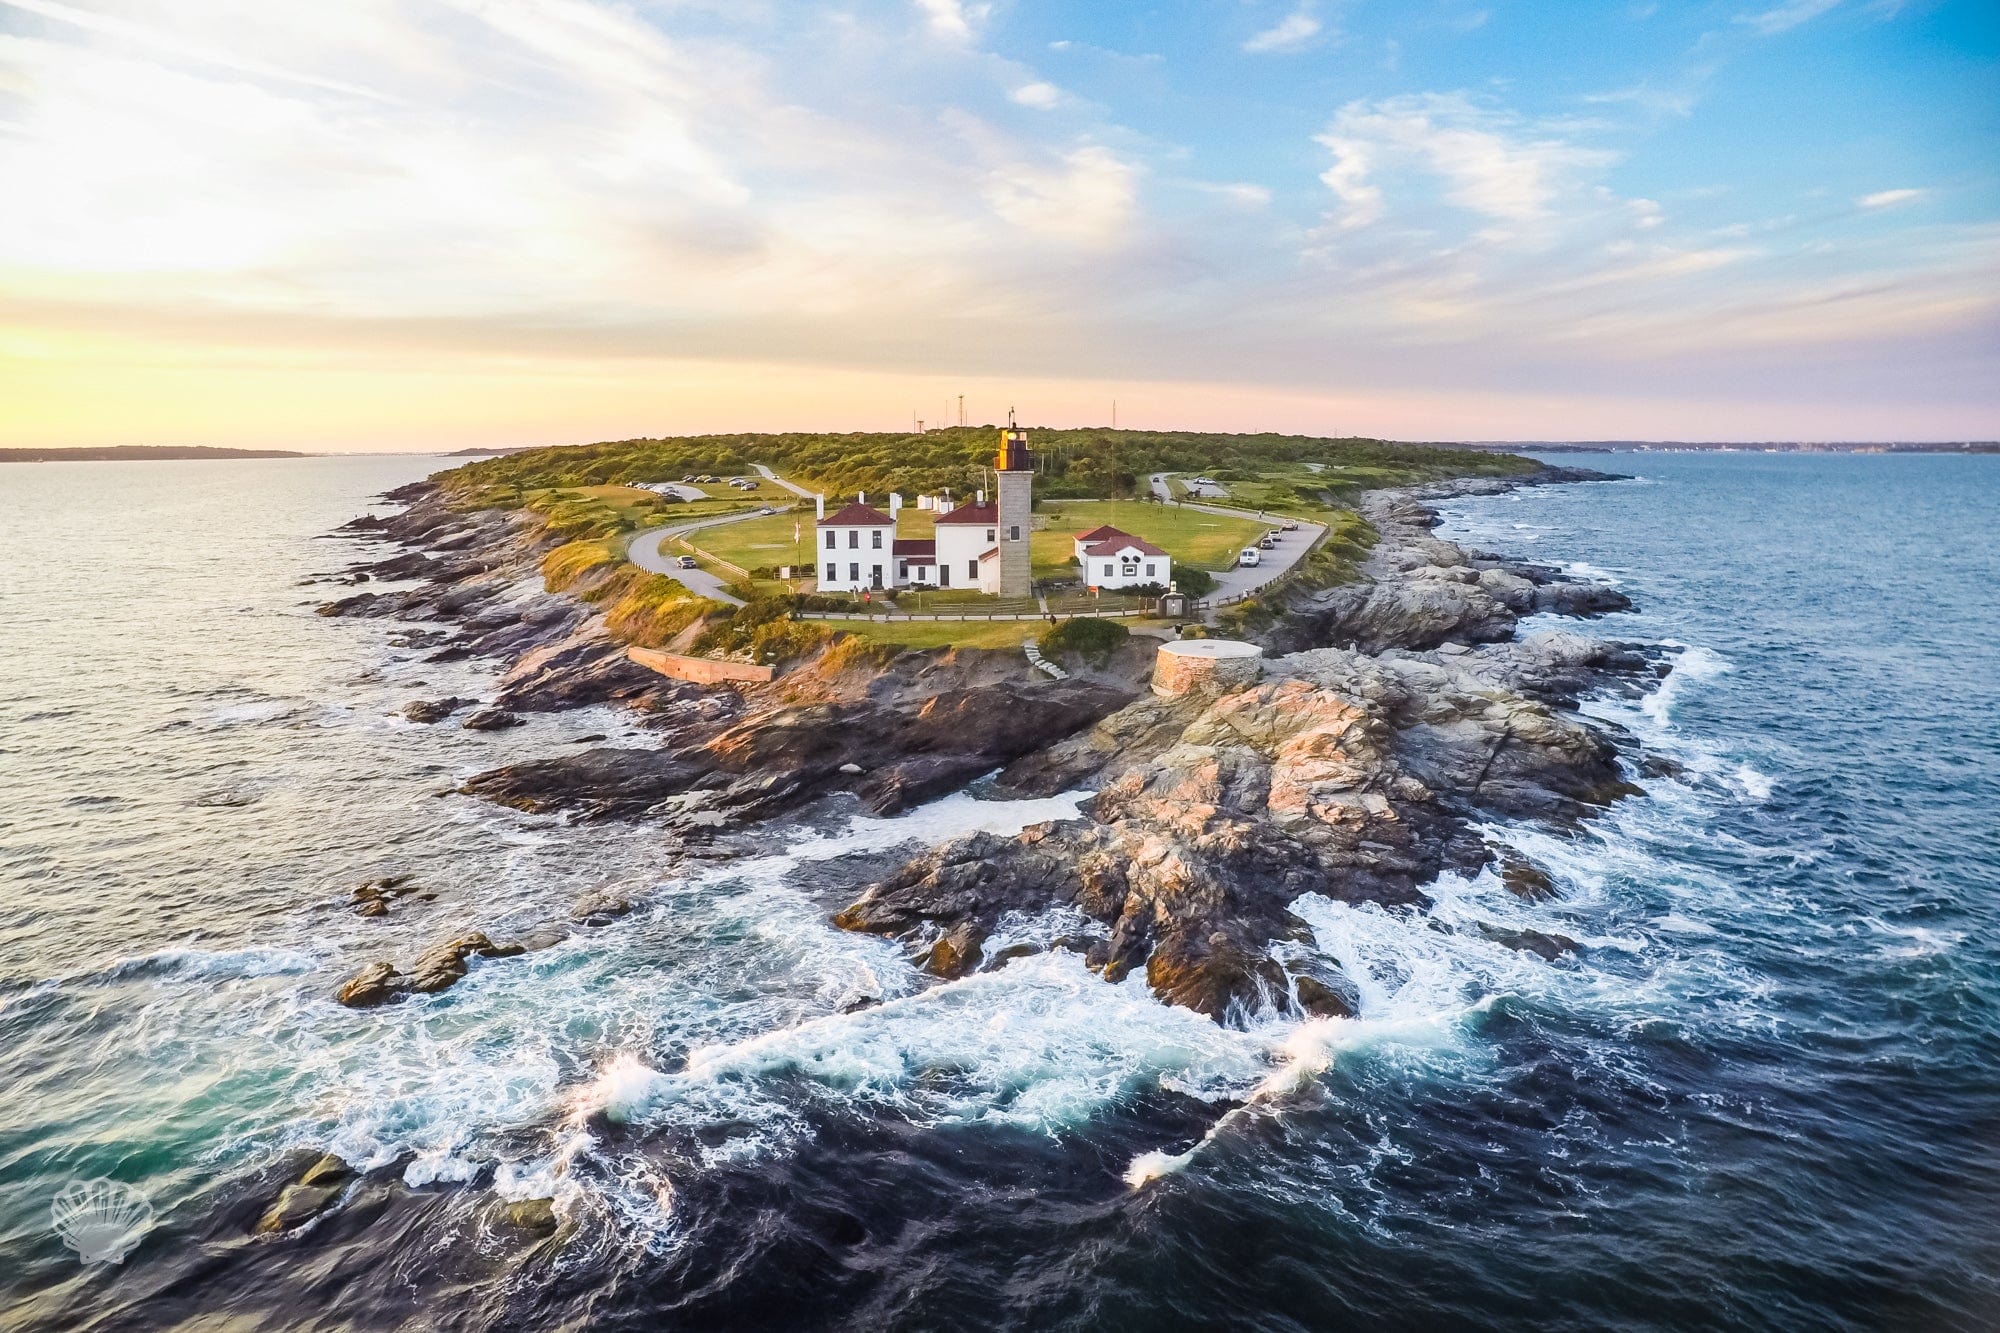 Cate Brown Photo Beavertail #3  //  Aerial Photography Made to Order Ocean Fine Art